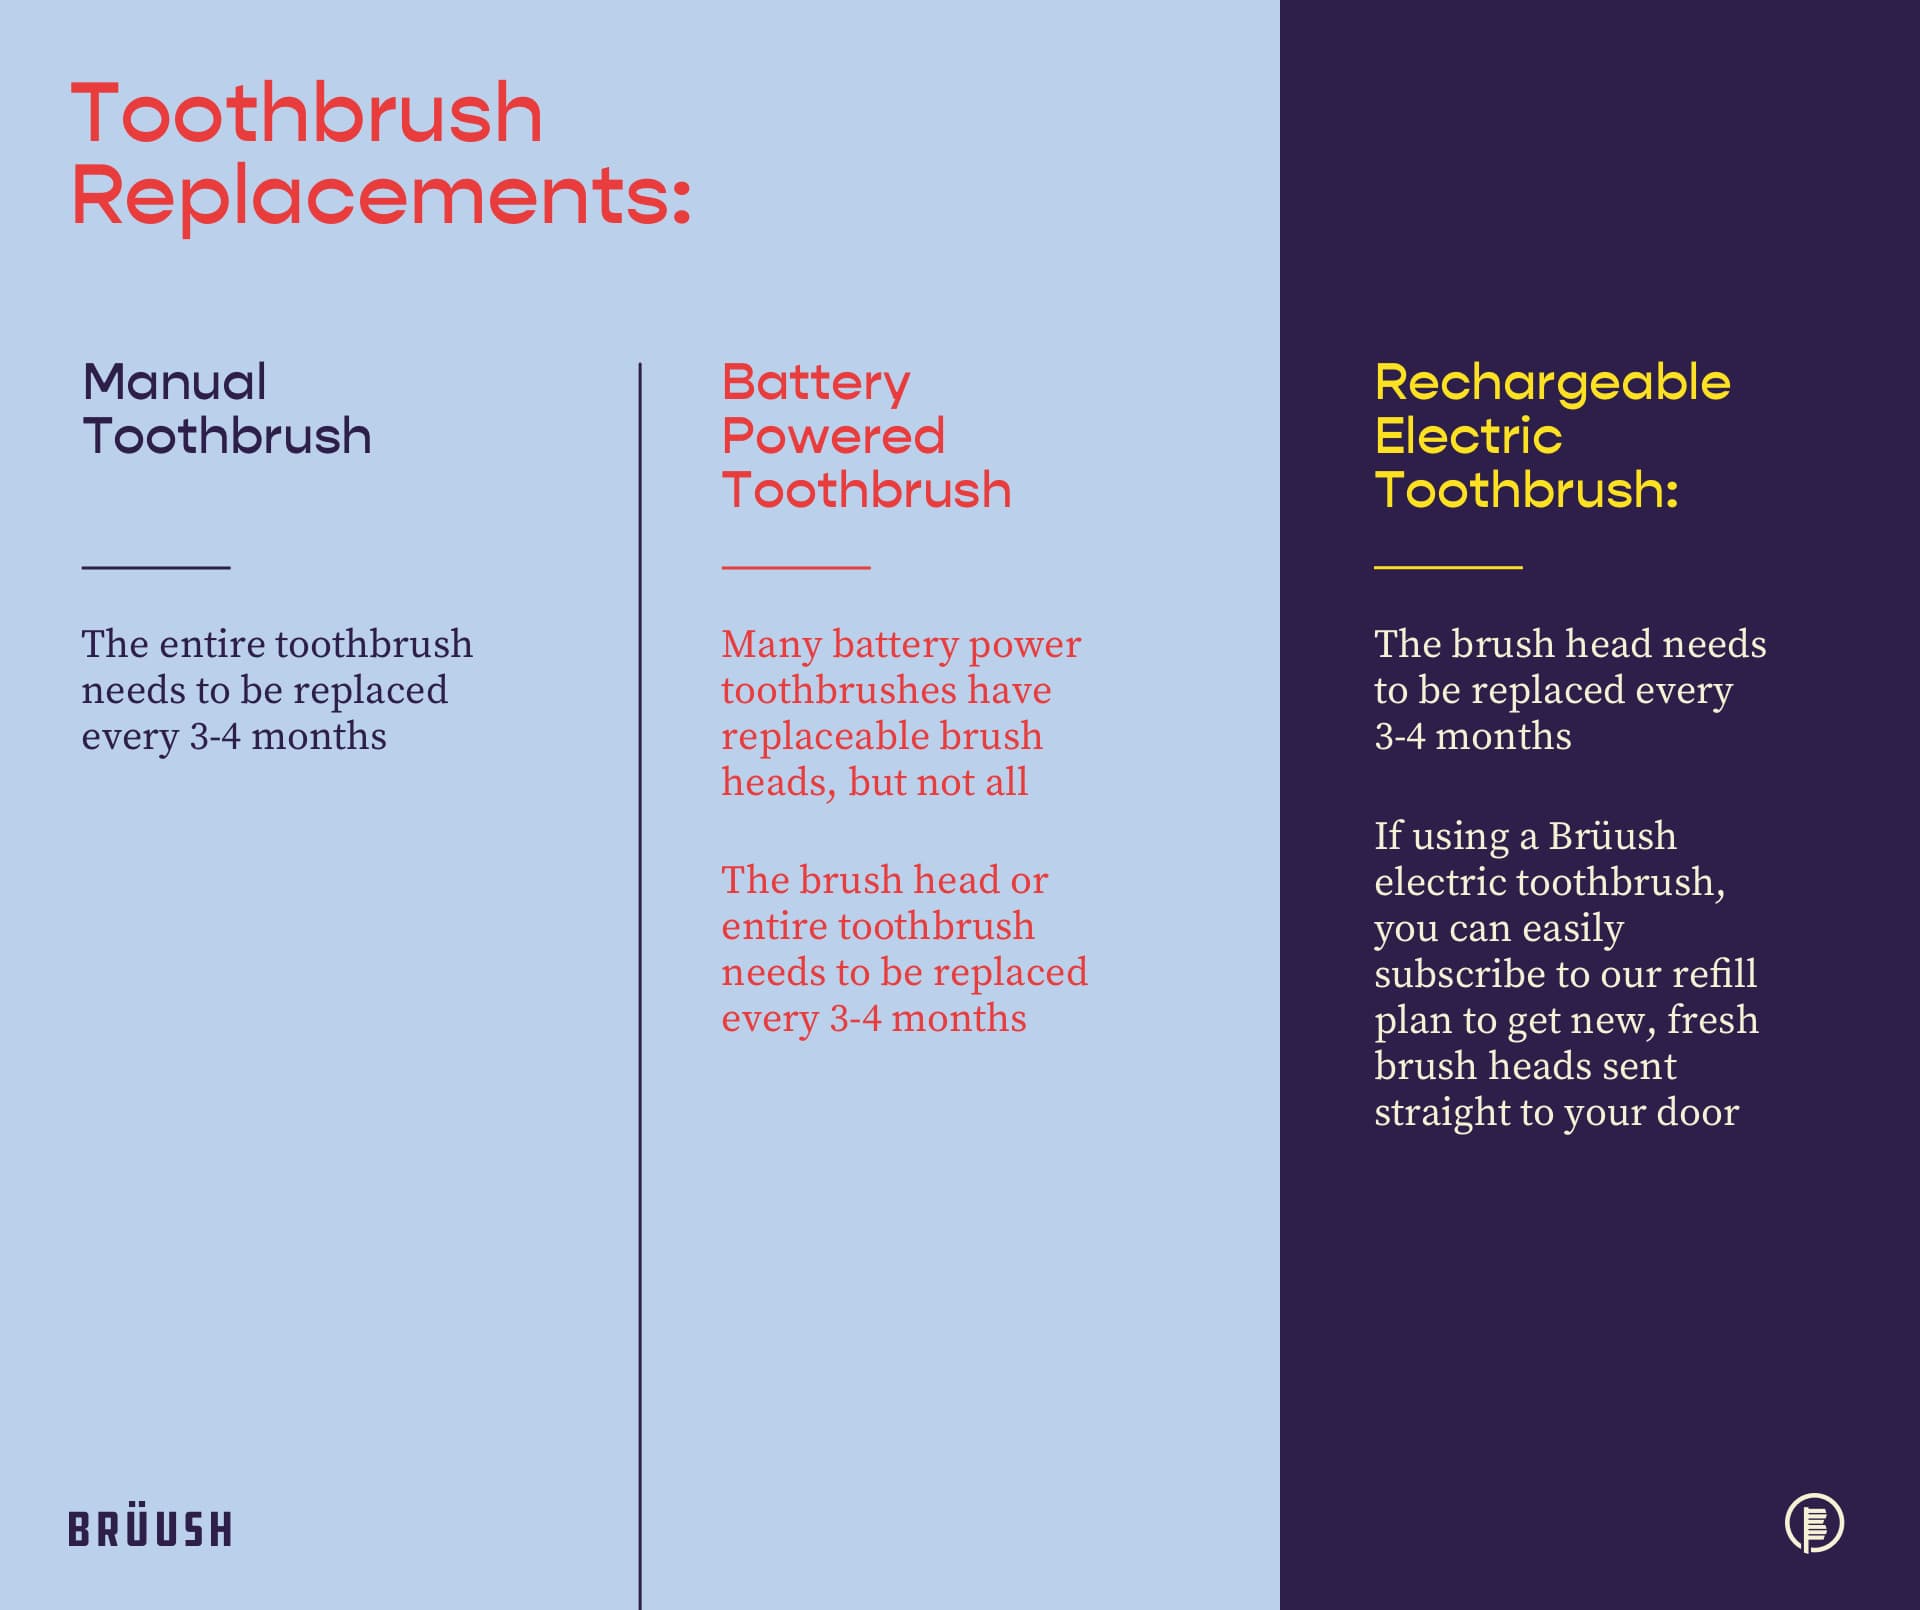 comparison of toothbrush replacements for different types of toothbrush